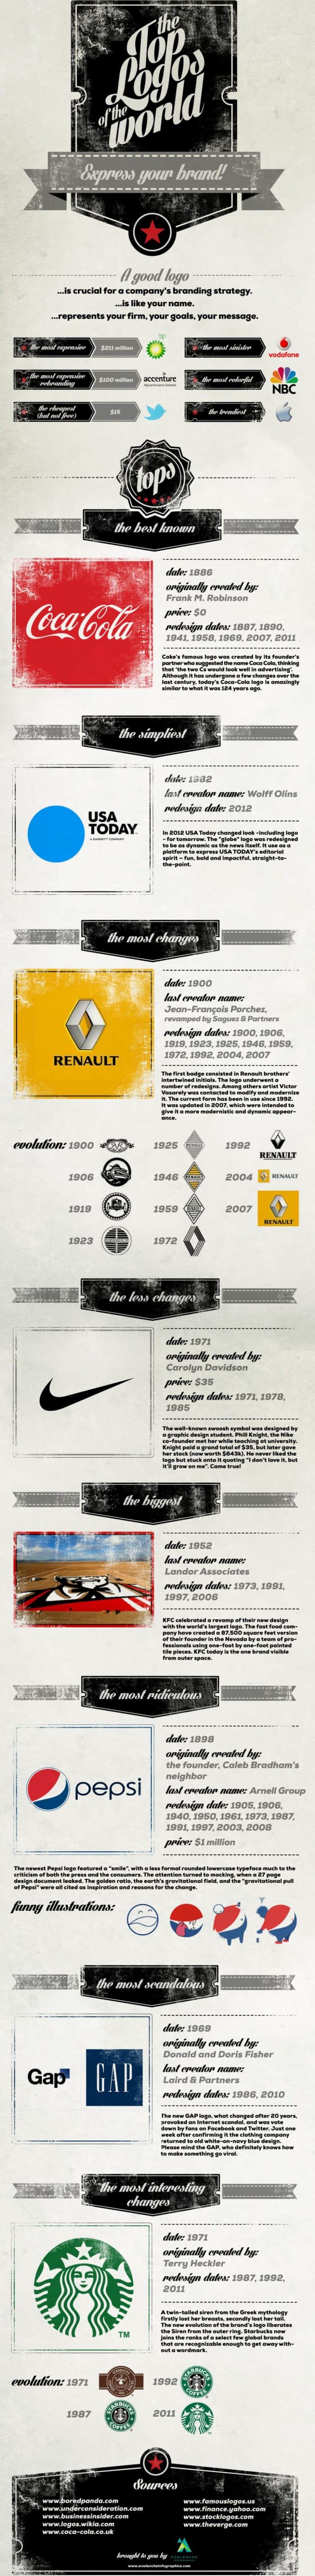 Top Logos of the World Infographic